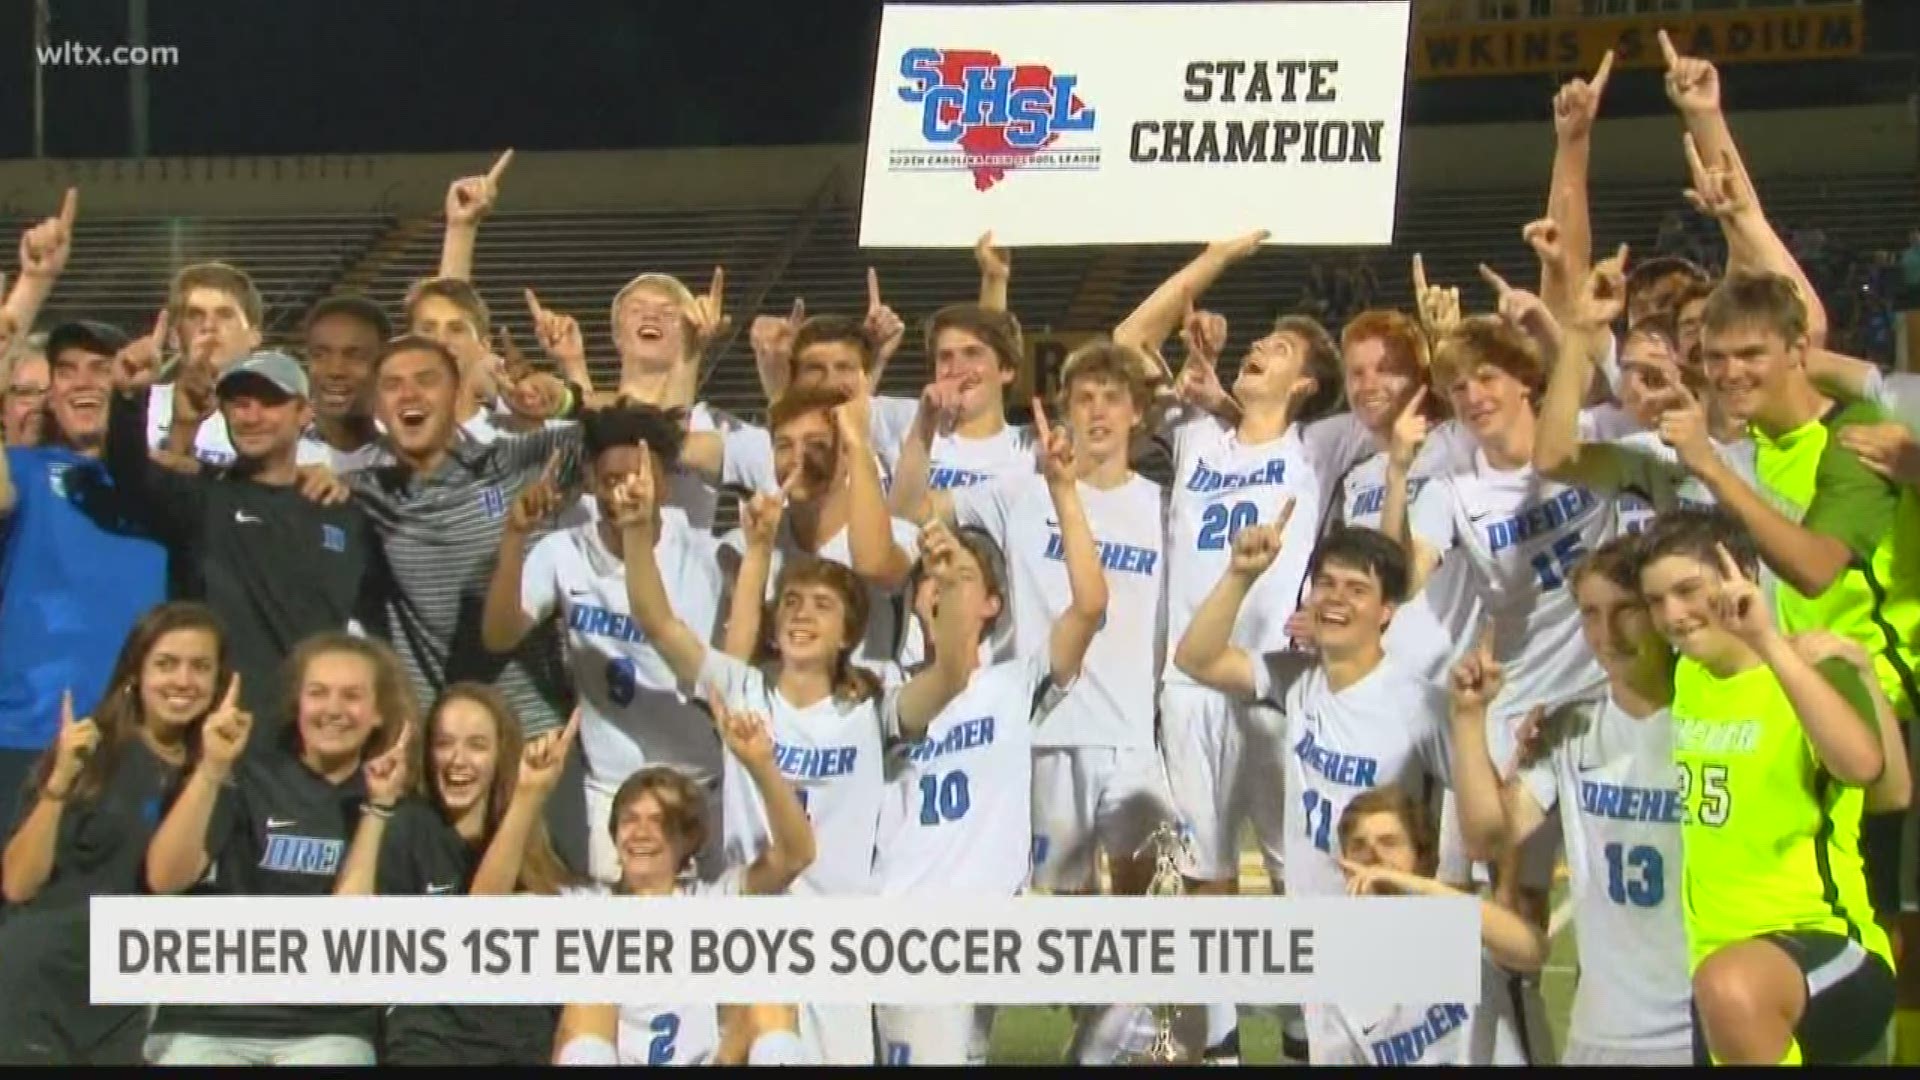 It came down to penalty kicks but Dreher prevailed 2-1 (4-3 PK) over Eastside to win their first ever state title in boys soccer. Dreher won three road games to get to the finals and capped off their run with a state title.